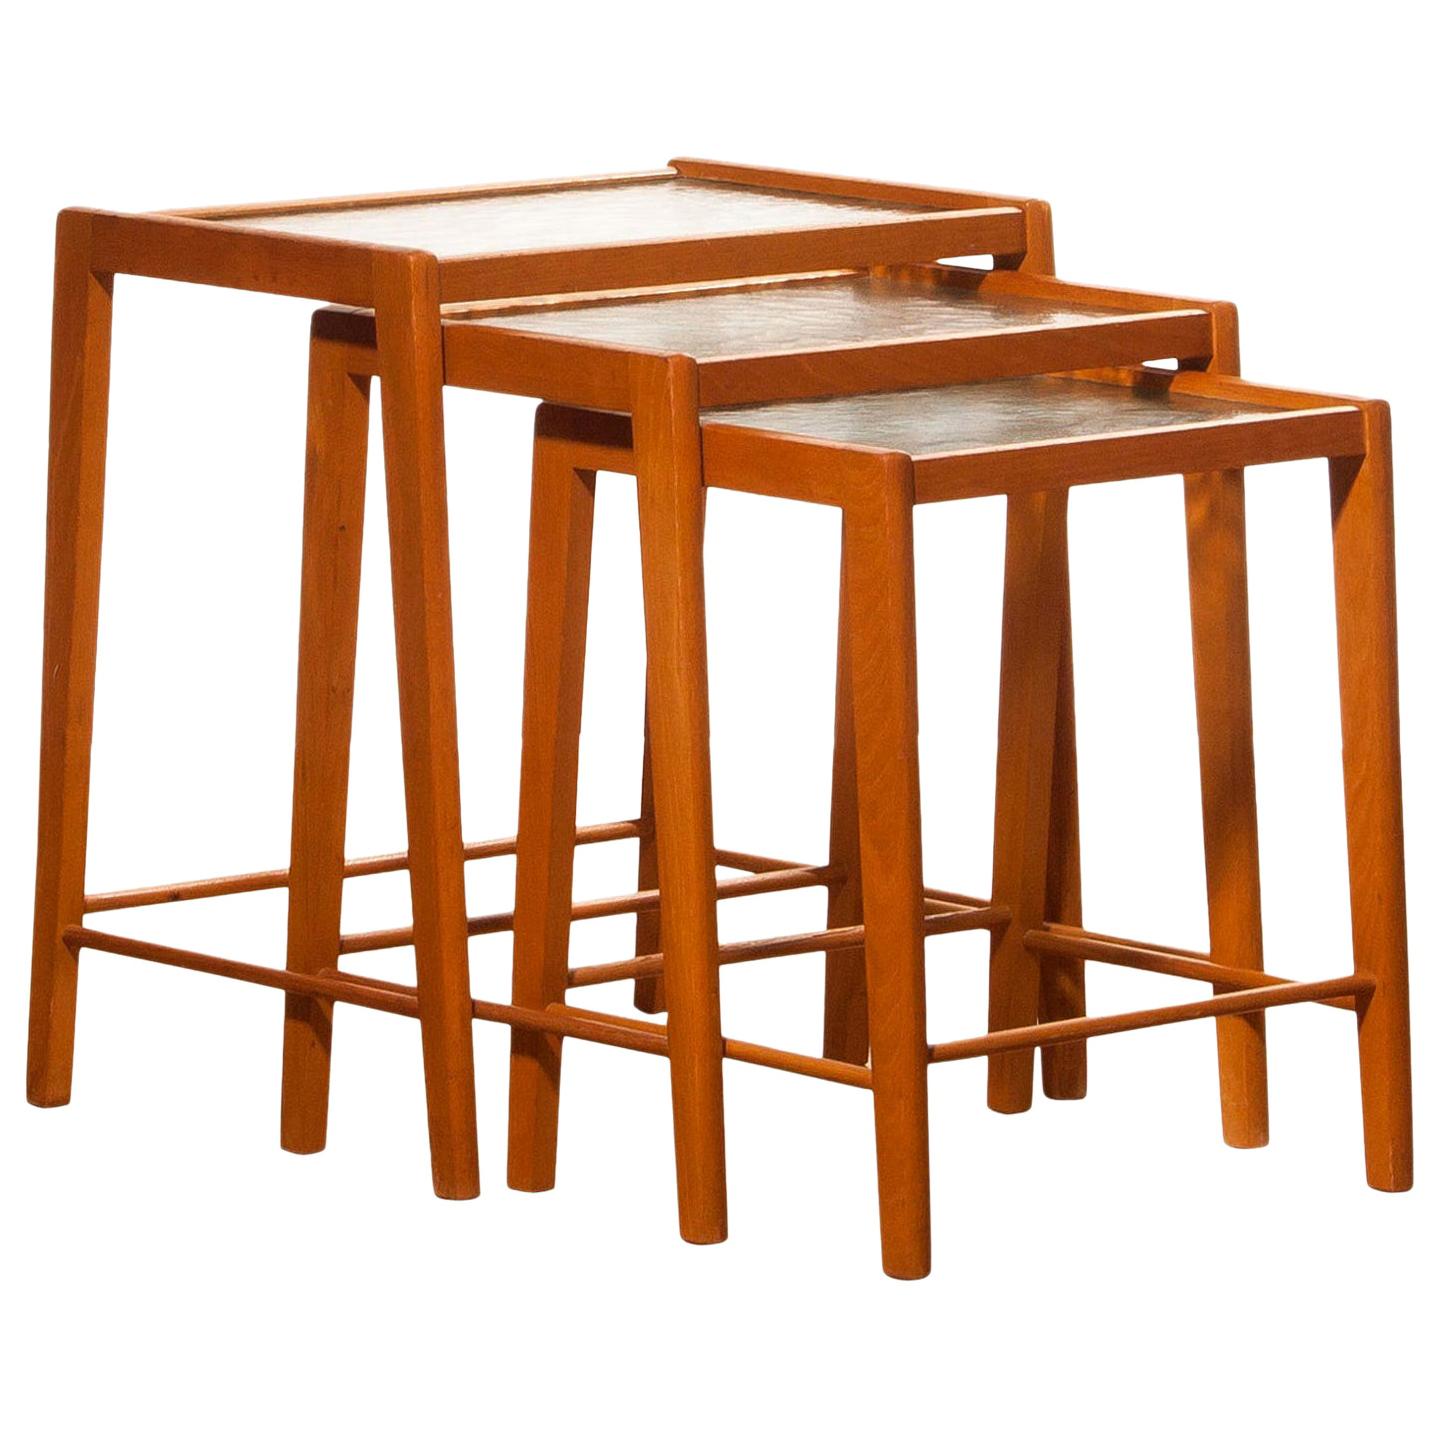 1960s, Set of Three Oak and Glass Nesting Tables, Sweden